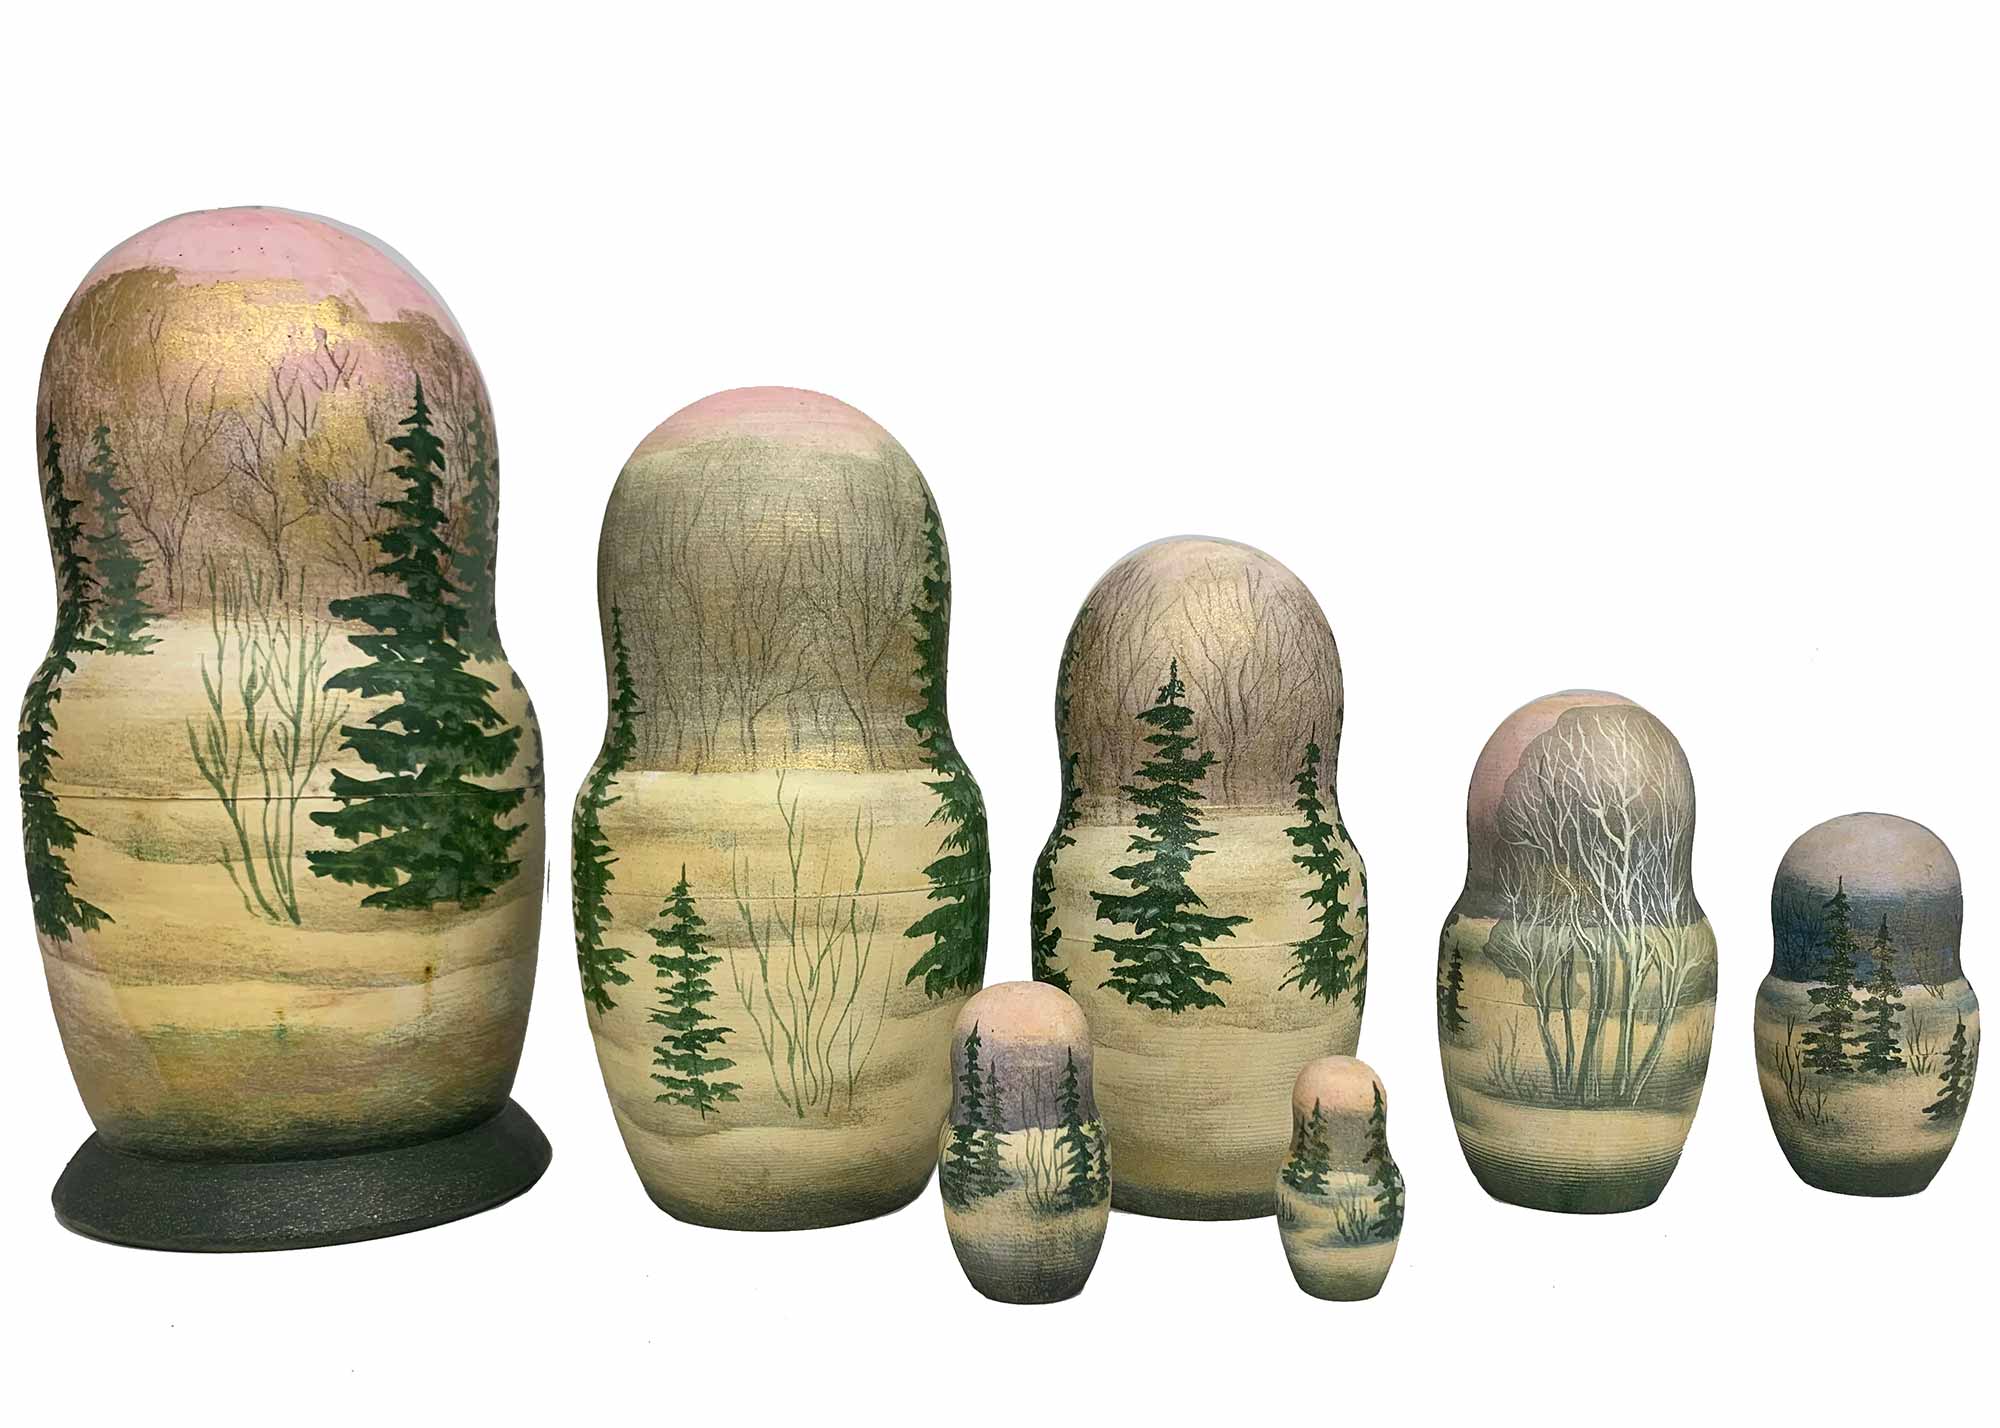 Buy Unlacquered Art Doll "A Walk in the Forest " 7pc./8" at GoldenCockerel.com